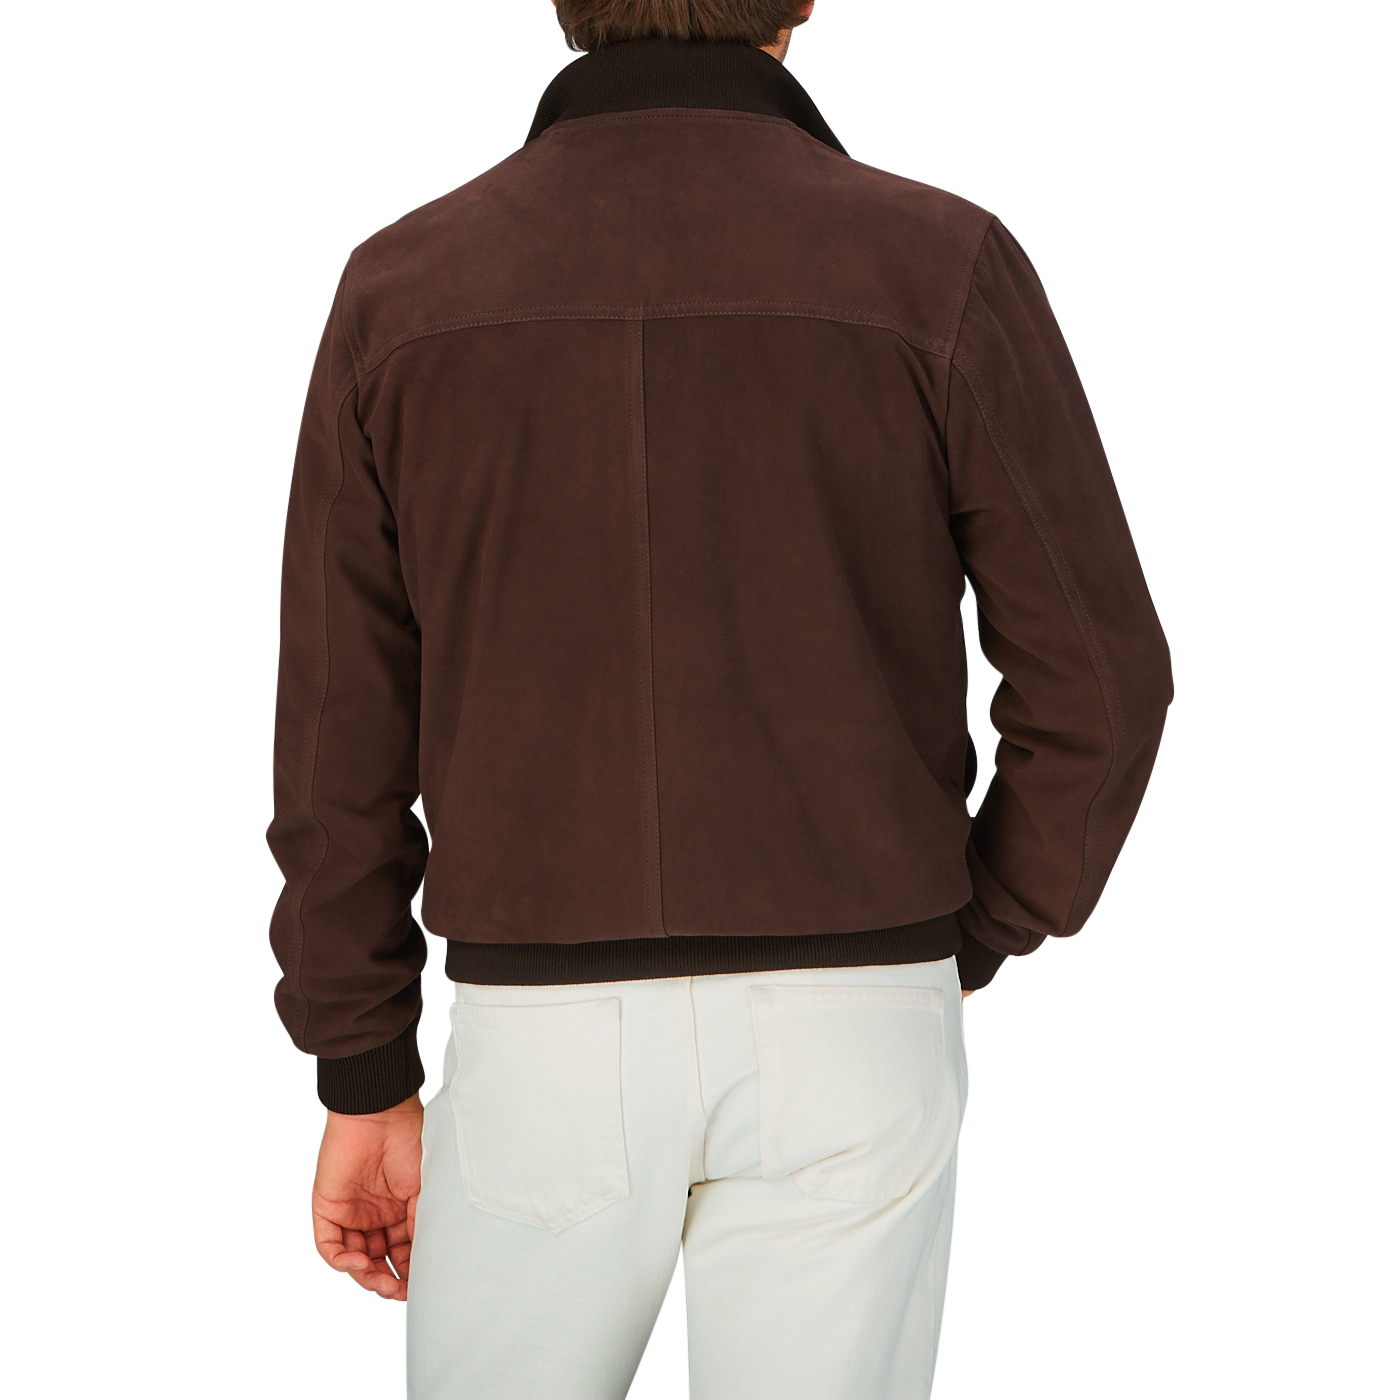 Rear view of a person wearing a Valstar Dark Brown Suede Leather Valstarino Jacket and white pants.